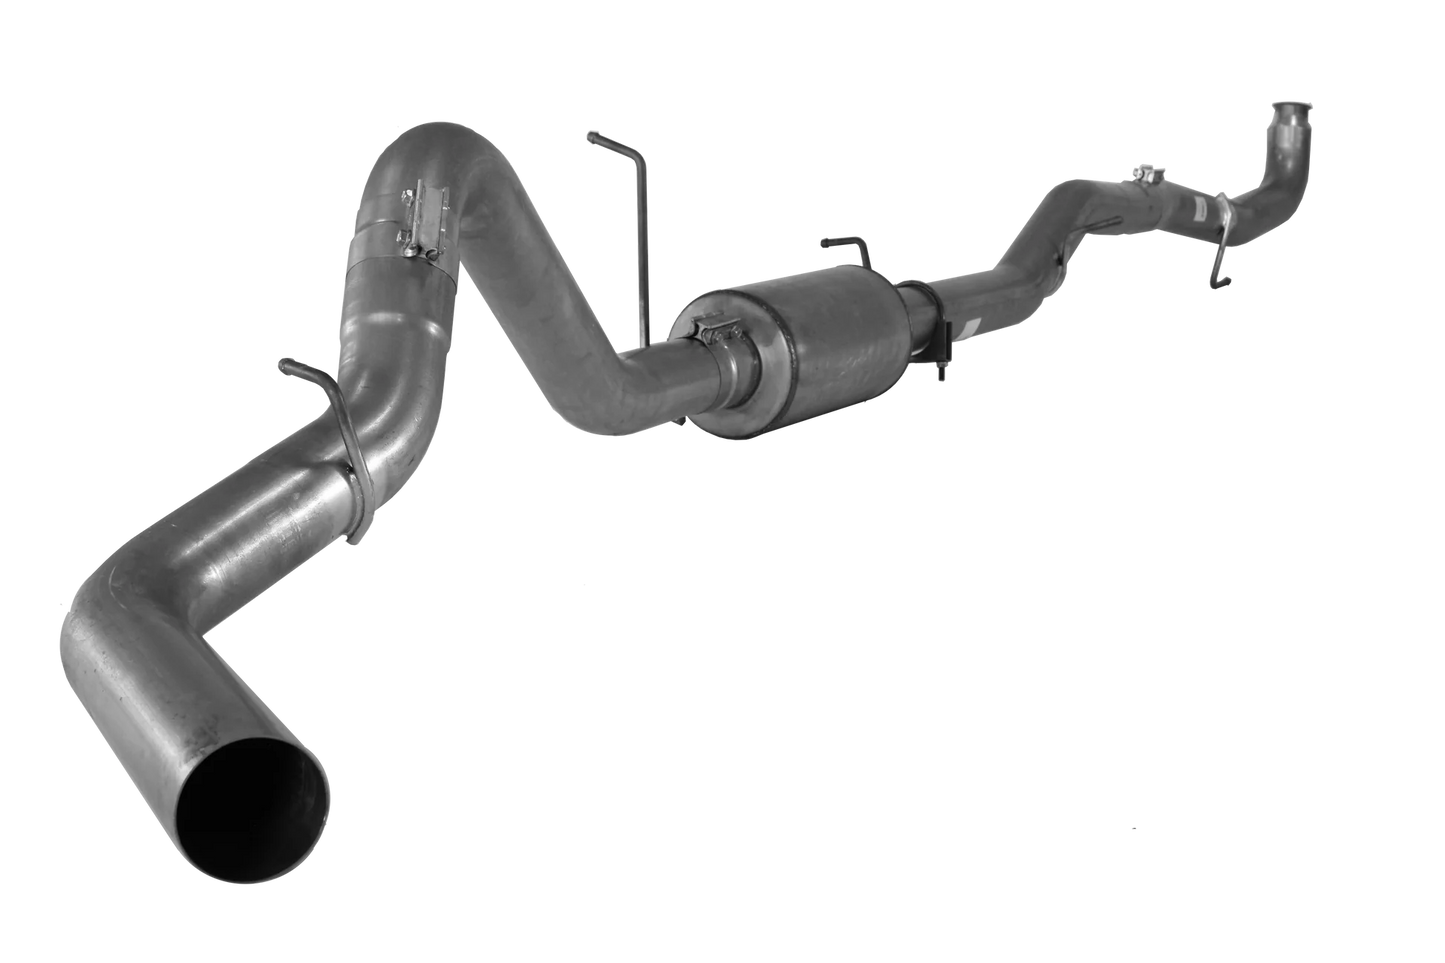 531005 531006 532005 532006 Mel's Manufacturing 5" Downpipe Back Single | 2011-2015 GM 2500/3500 6.6L DURAMAX    Mels Mfg FloPro Flo-Pro Flo Pro Hell On Wheels Performance Ltd Limited Canadian Owned and Operated Online Diesel Parts Distribution & Wholesale Supply Center in Alberta Canada Shipping Supplying to Alberta British Columbia Sask Saskatchewan Manitoba Ontario Quebec Newfoundland Labrador New Brunswick Nova Scotia Prince Edward Island AB BC SK MB ON QC PQ NS NB NFLD N.L. PEI